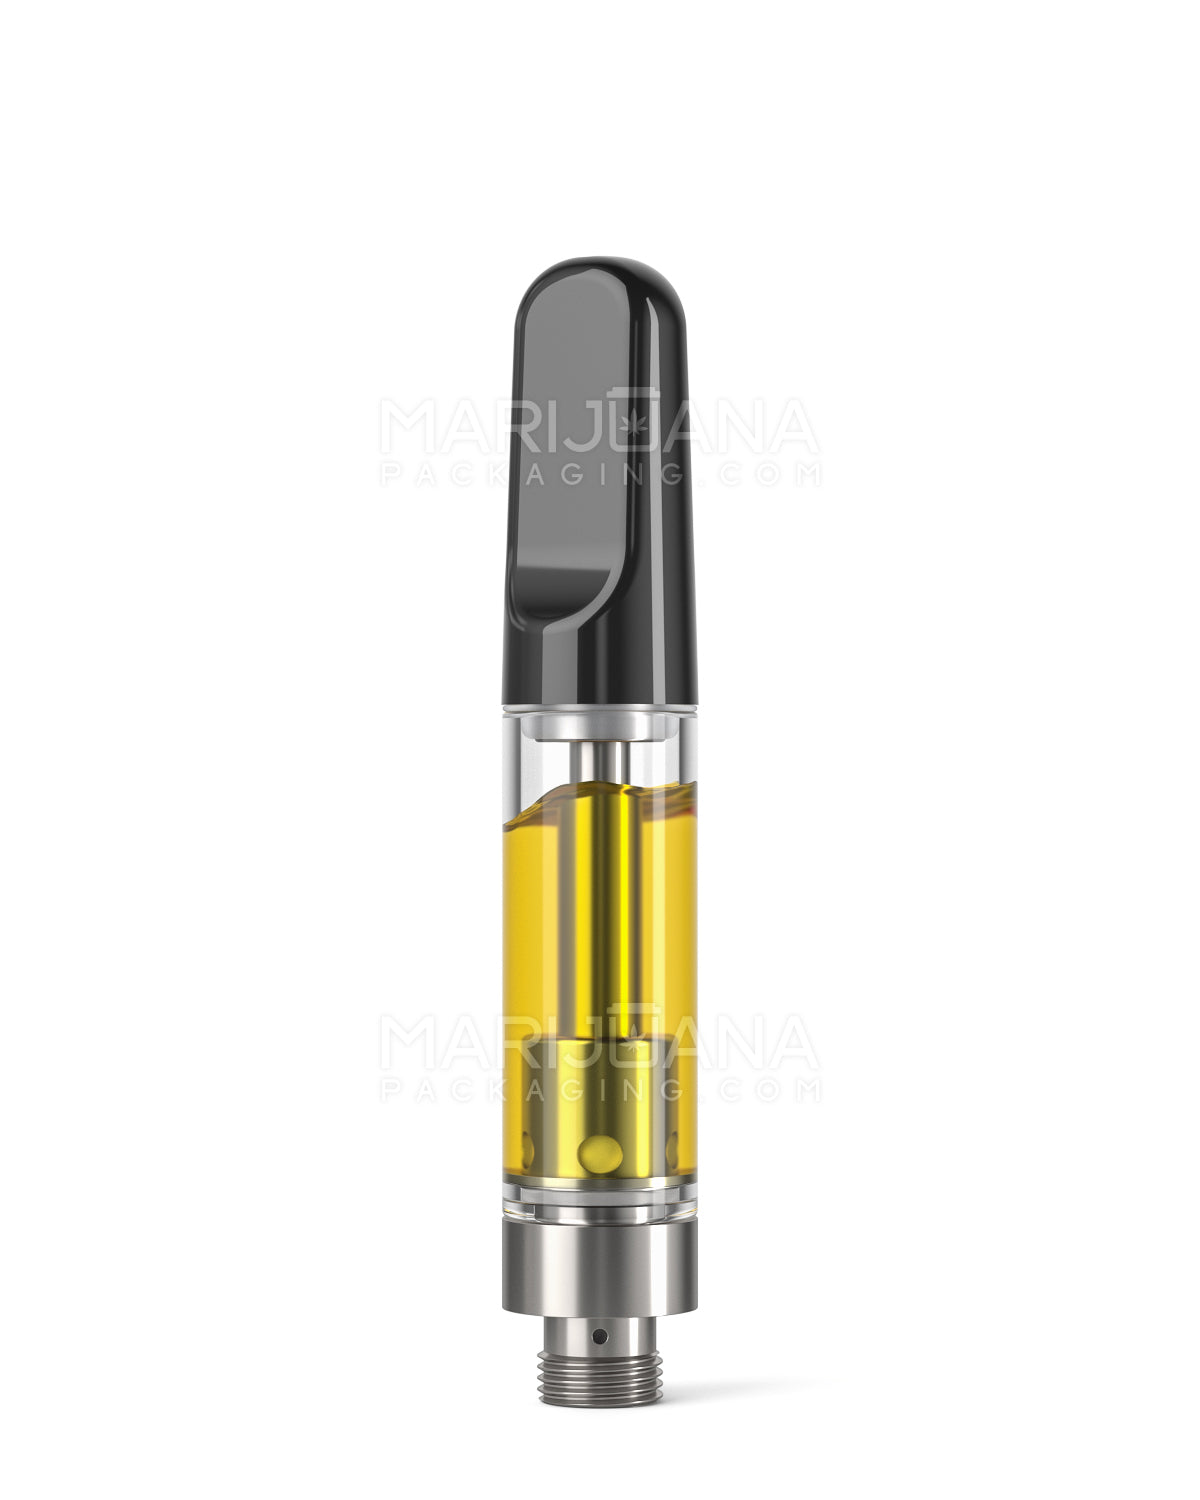 CCELL | Liquid6 Reactor Glass Vape Cartridge with Black Ceramic Mouthpiece | 1mL - Screw On - 100 Count - 2